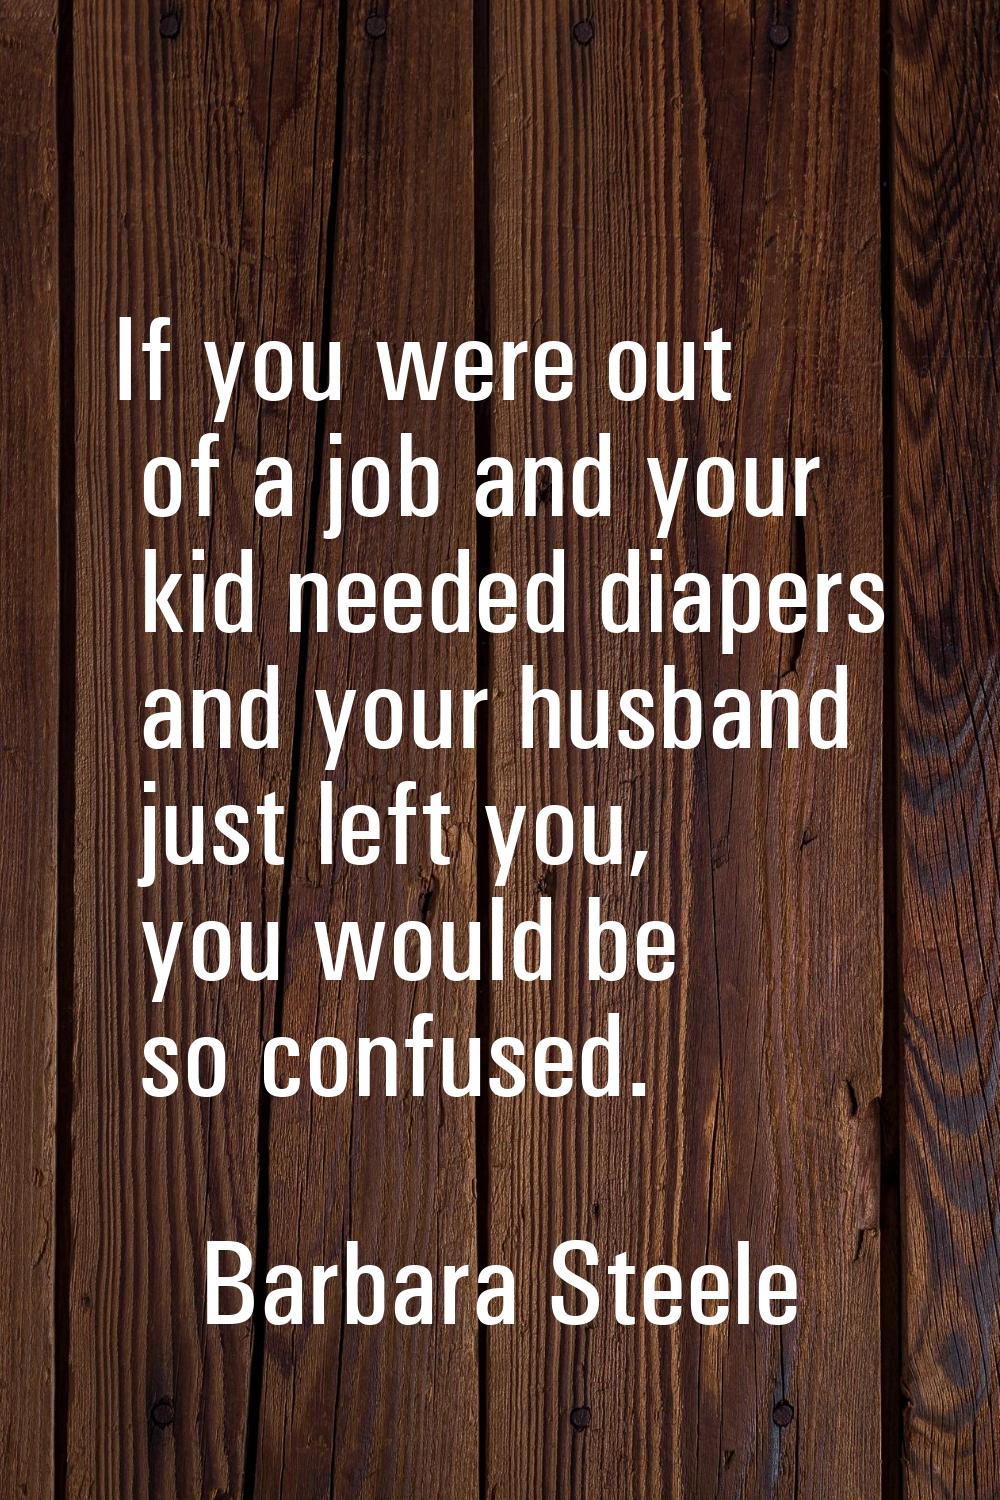 If you were out of a job and your kid needed diapers and your husband just left you, you would be s